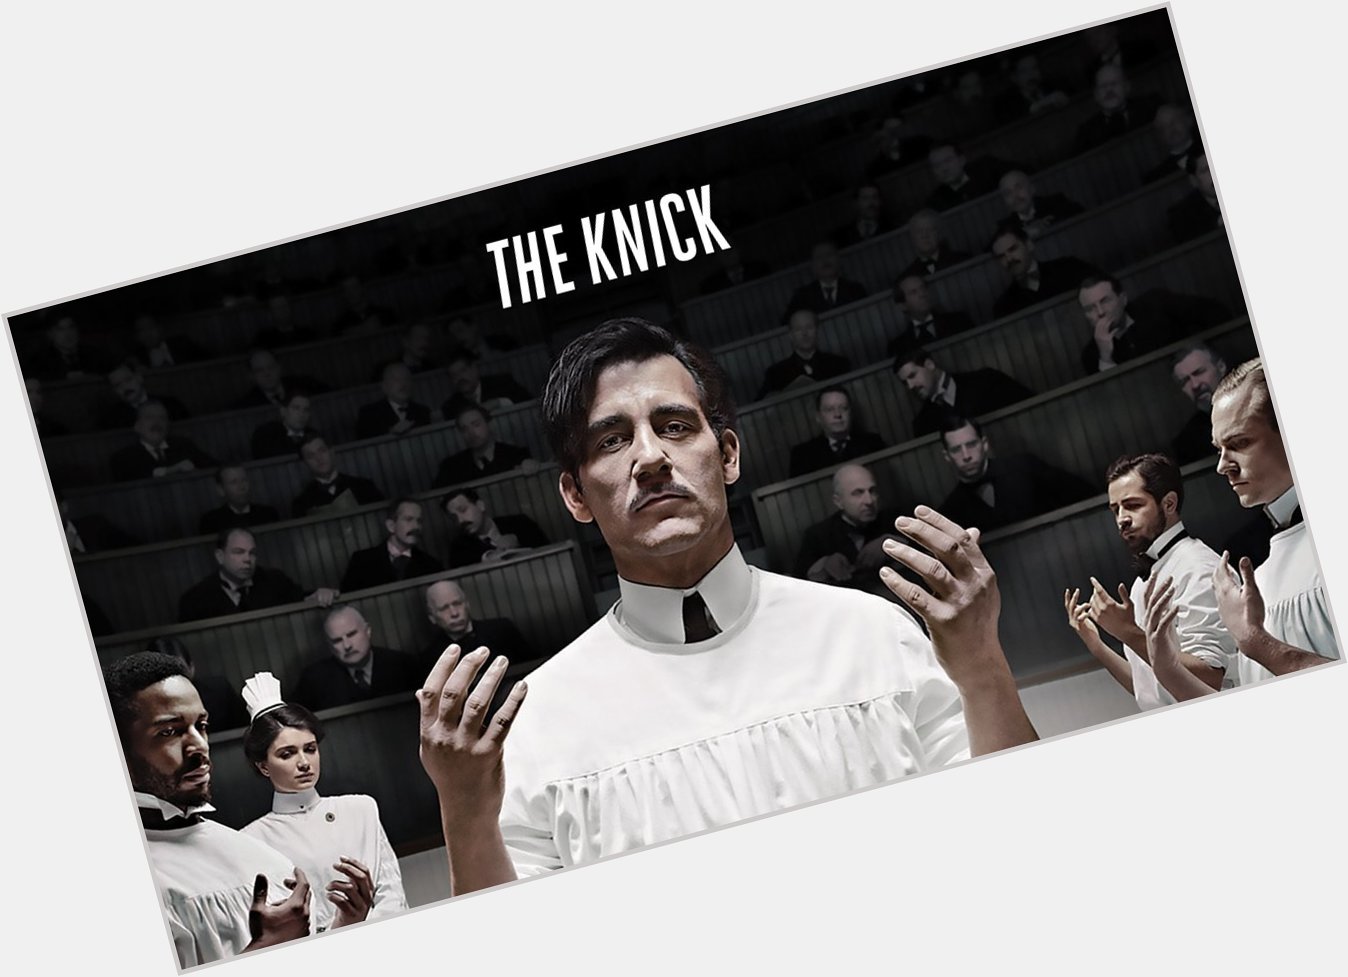  An incredible actor. \"The Knick\" should not have been cancelled. Happy Birthday Clive Owen. 